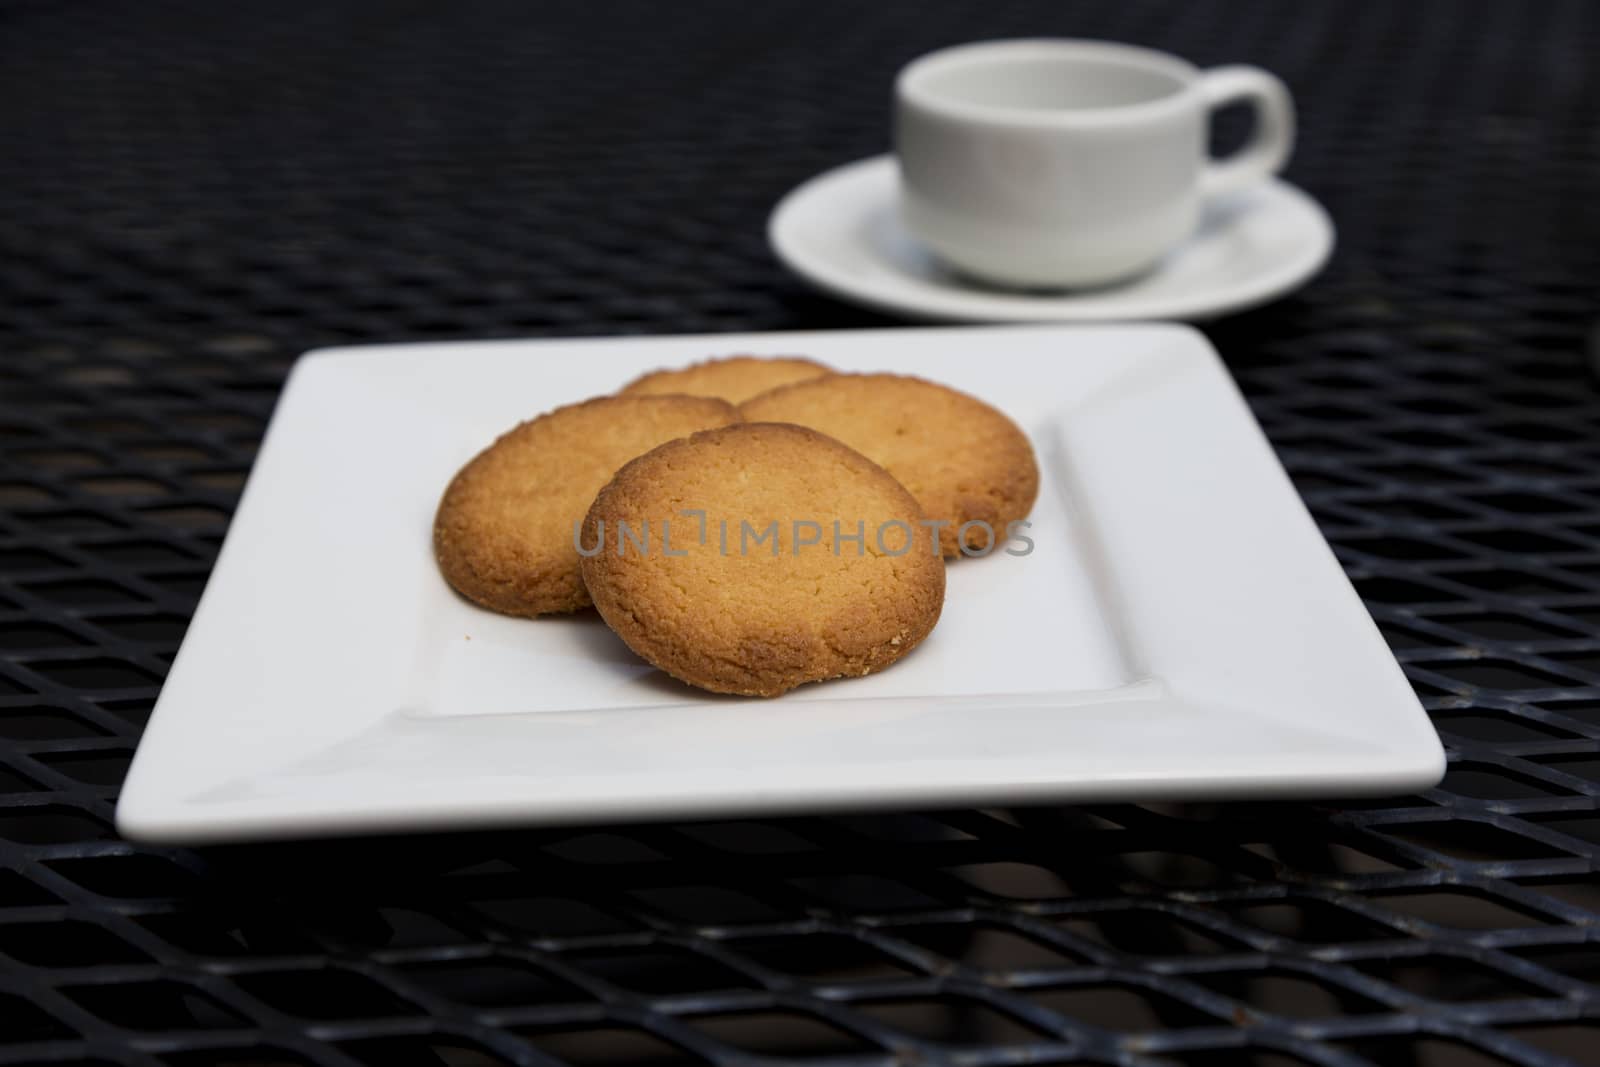 Selective focus on butter cookies on white plate with espresso visible in shallow depth of field.  Snack items on black metal mesh patio table.  